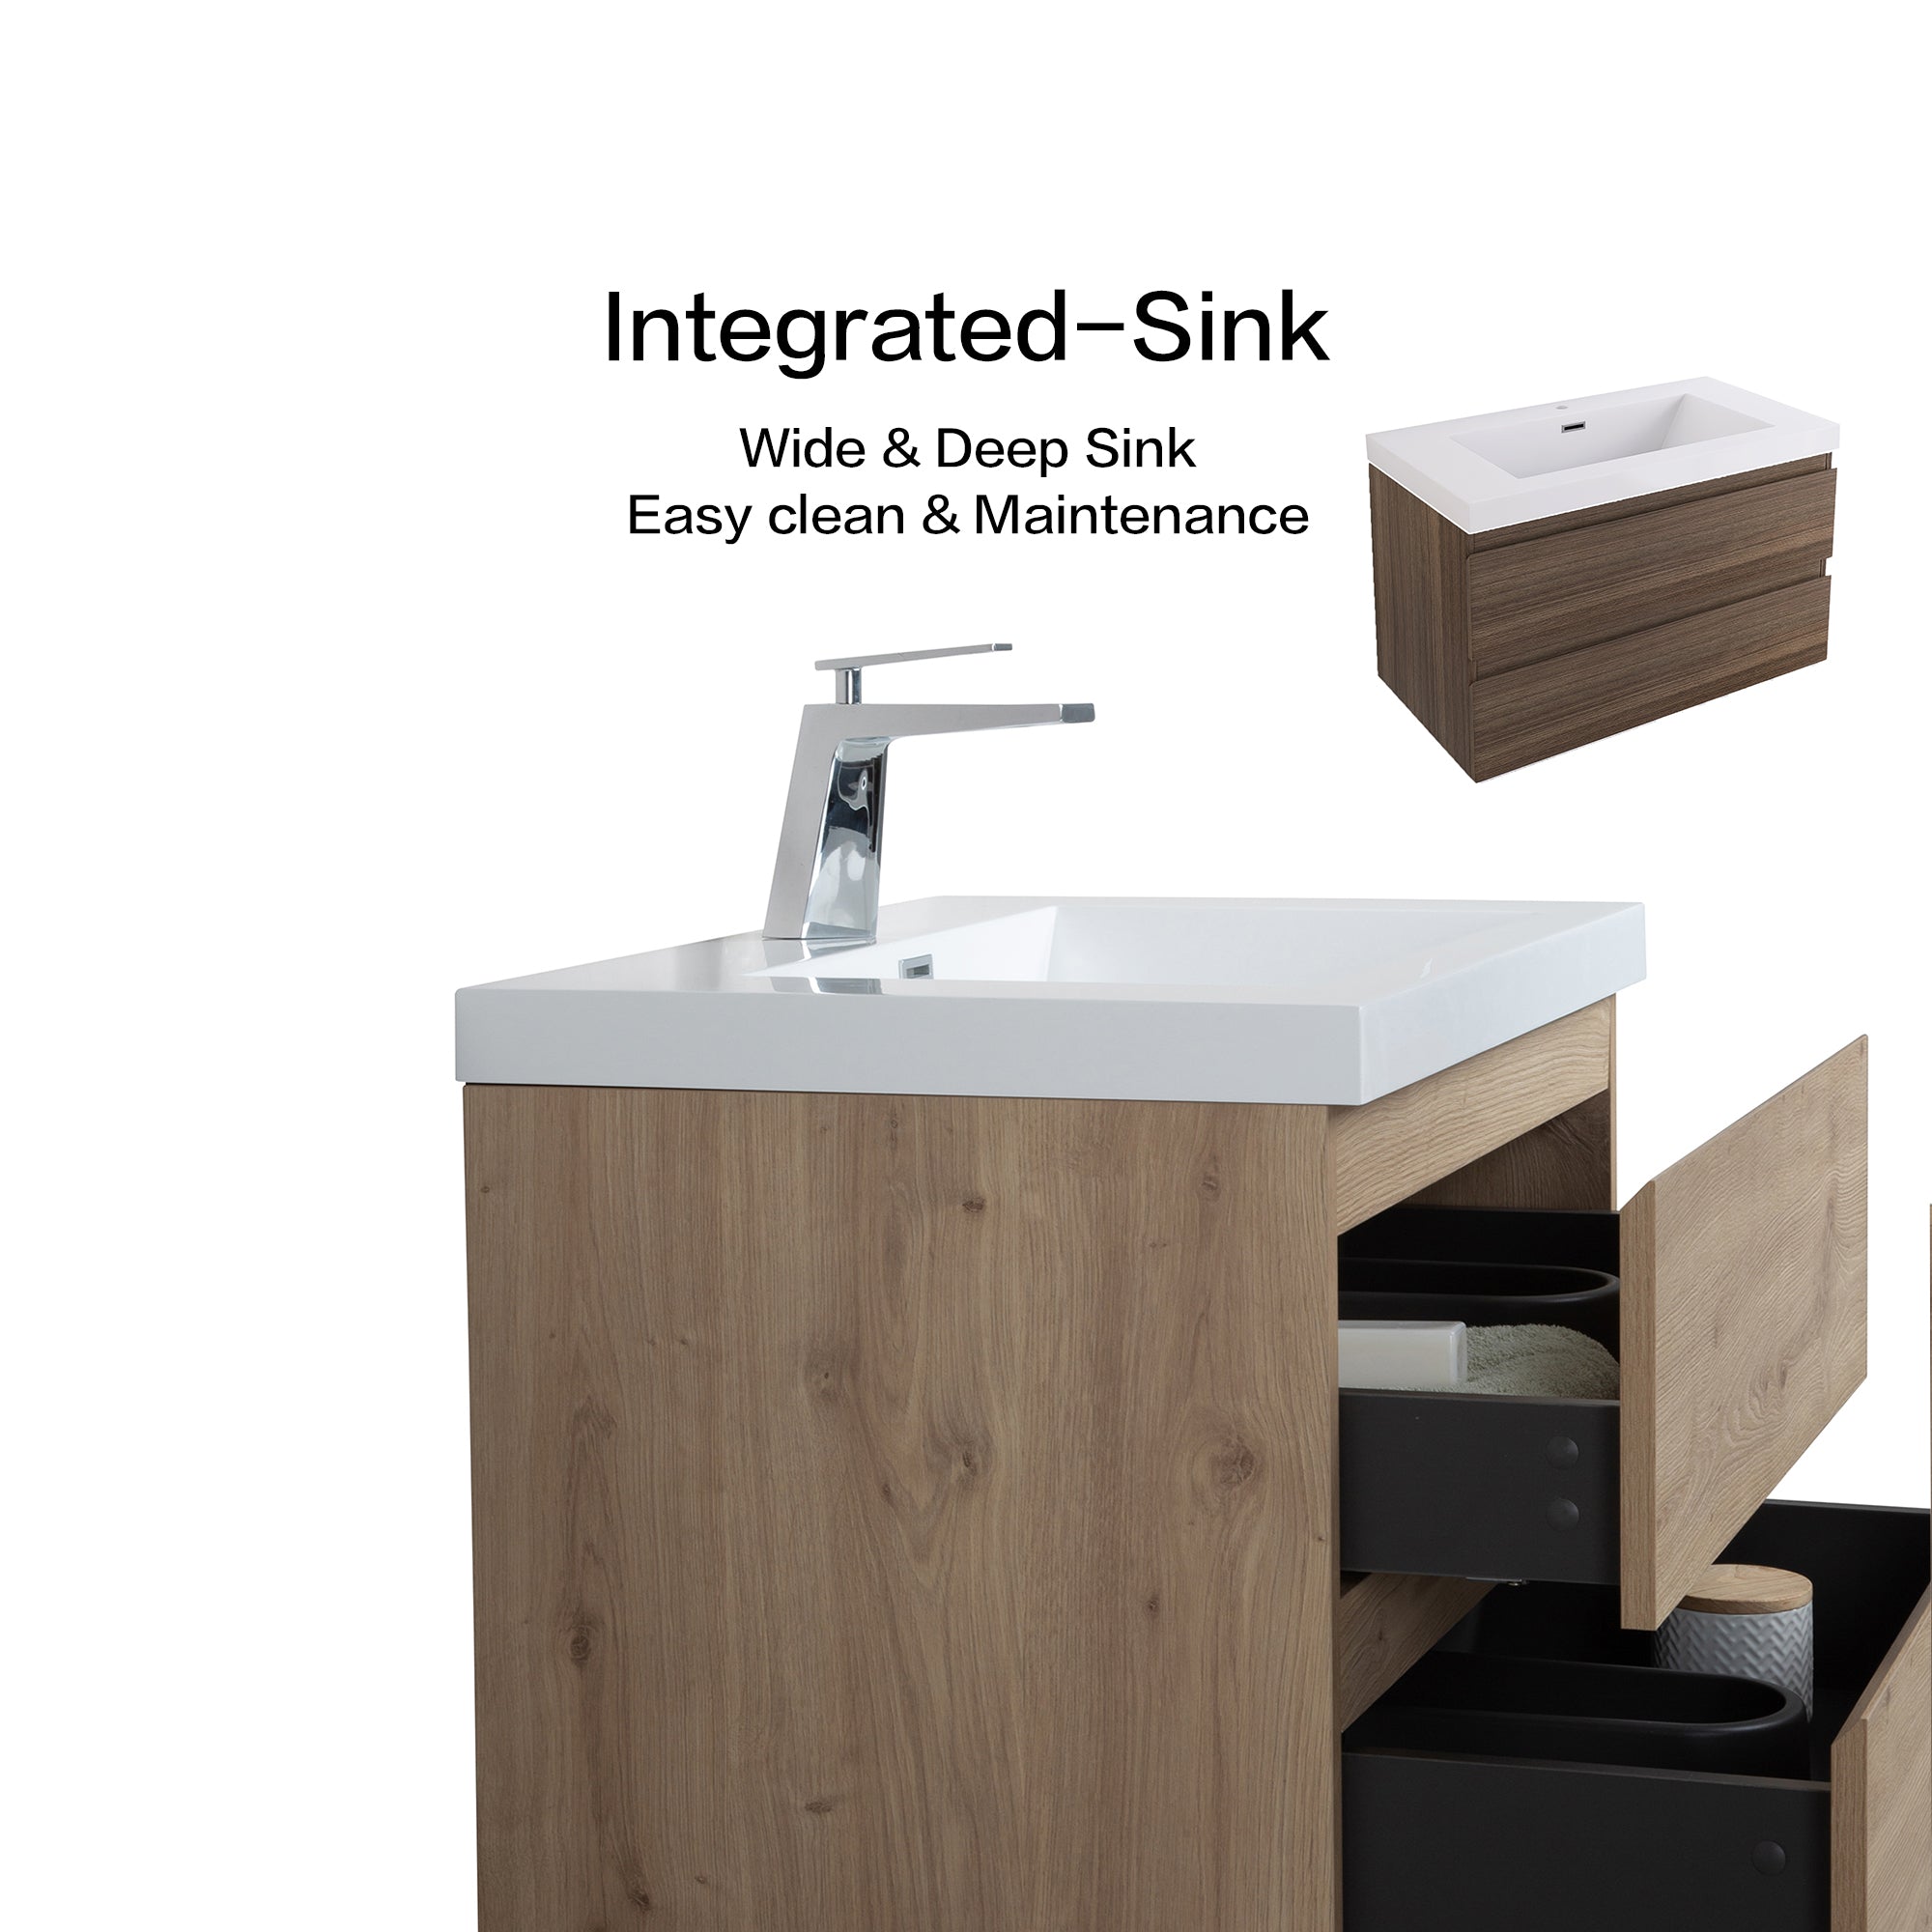 Staykiwi Wall-Mounted 2-drawer Bathroom Vanity Set with Integrated Resin Sink